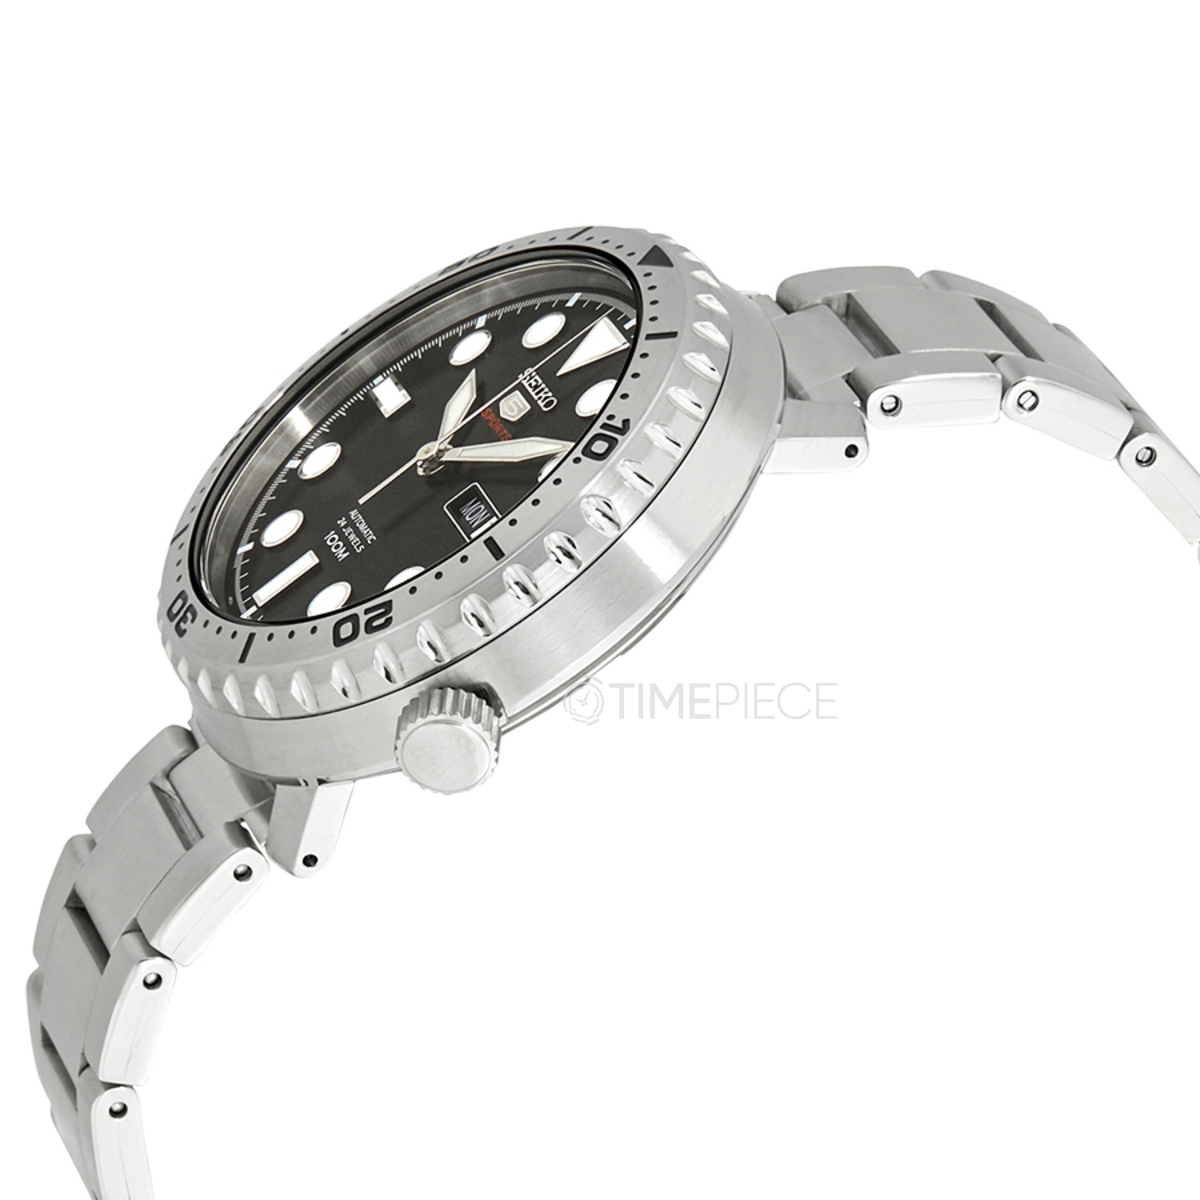 5 Sport Mens Automatic Watch